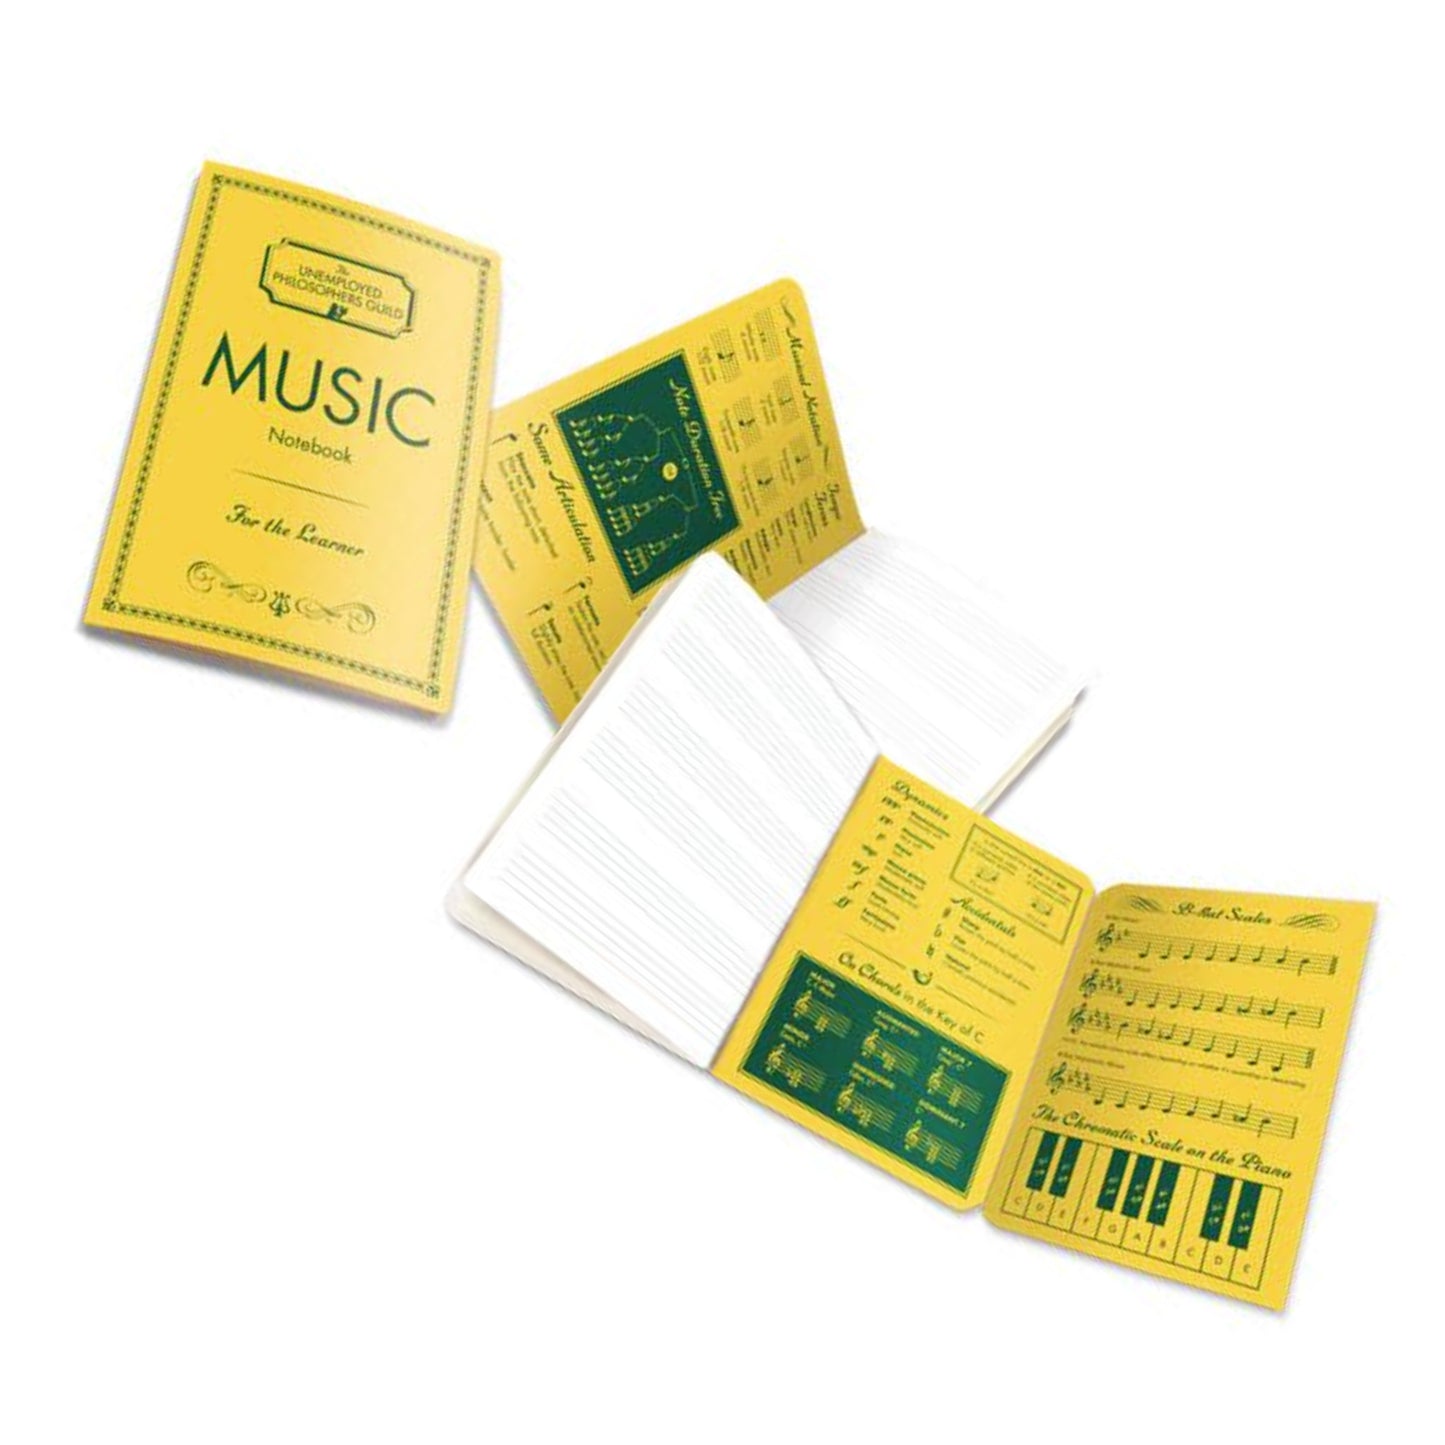 Music Notebook for the Learner